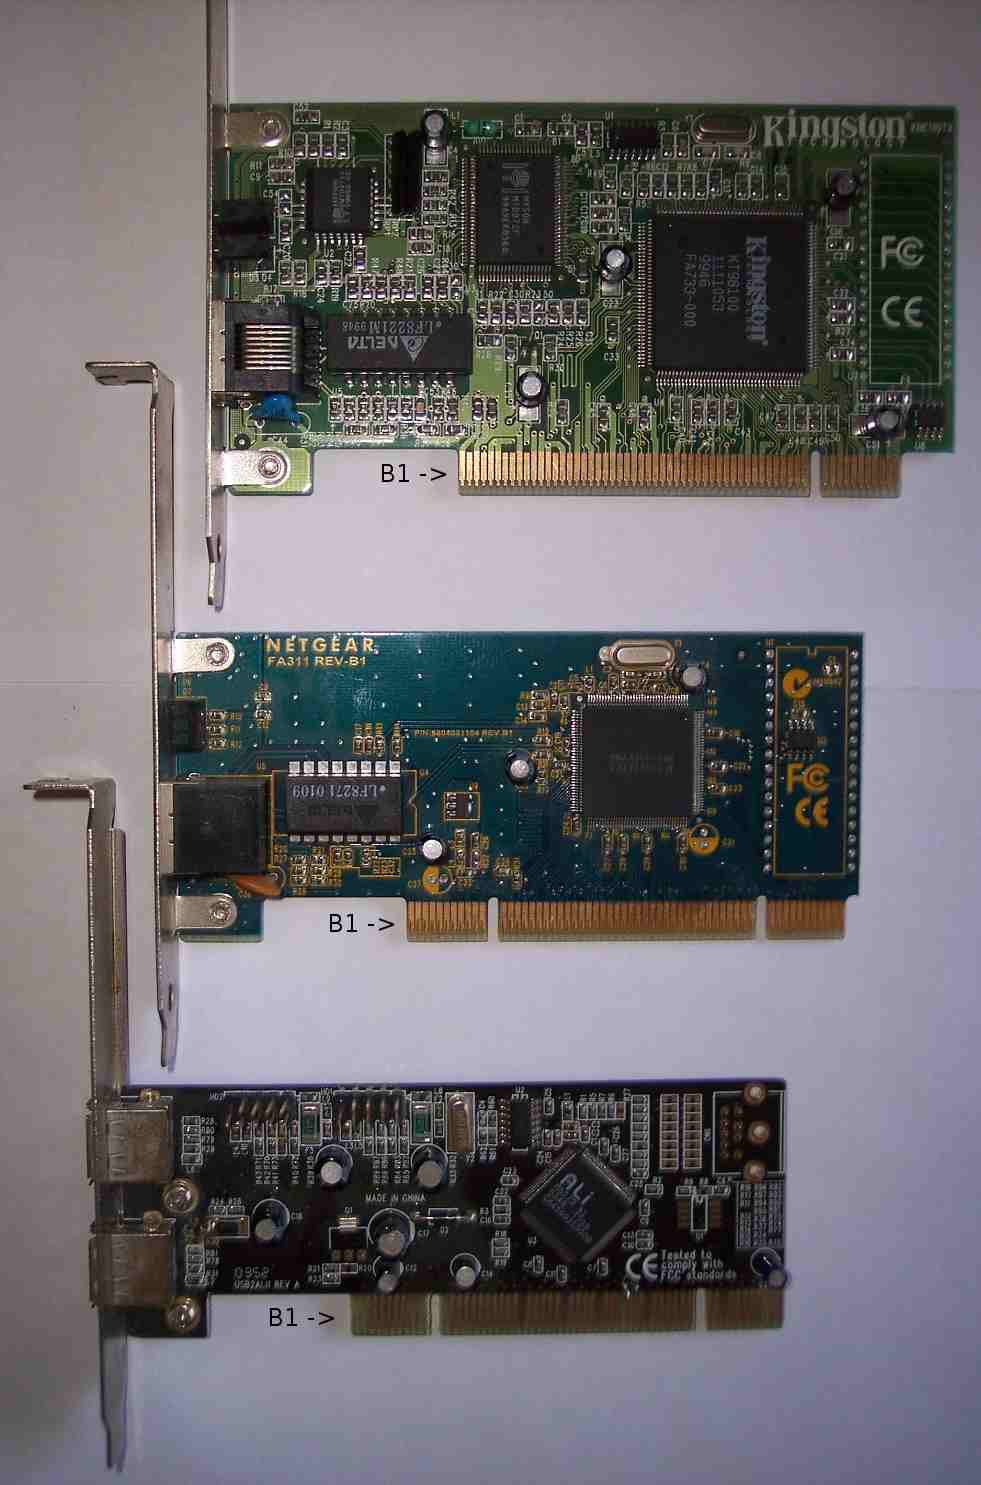 pci cards - side b